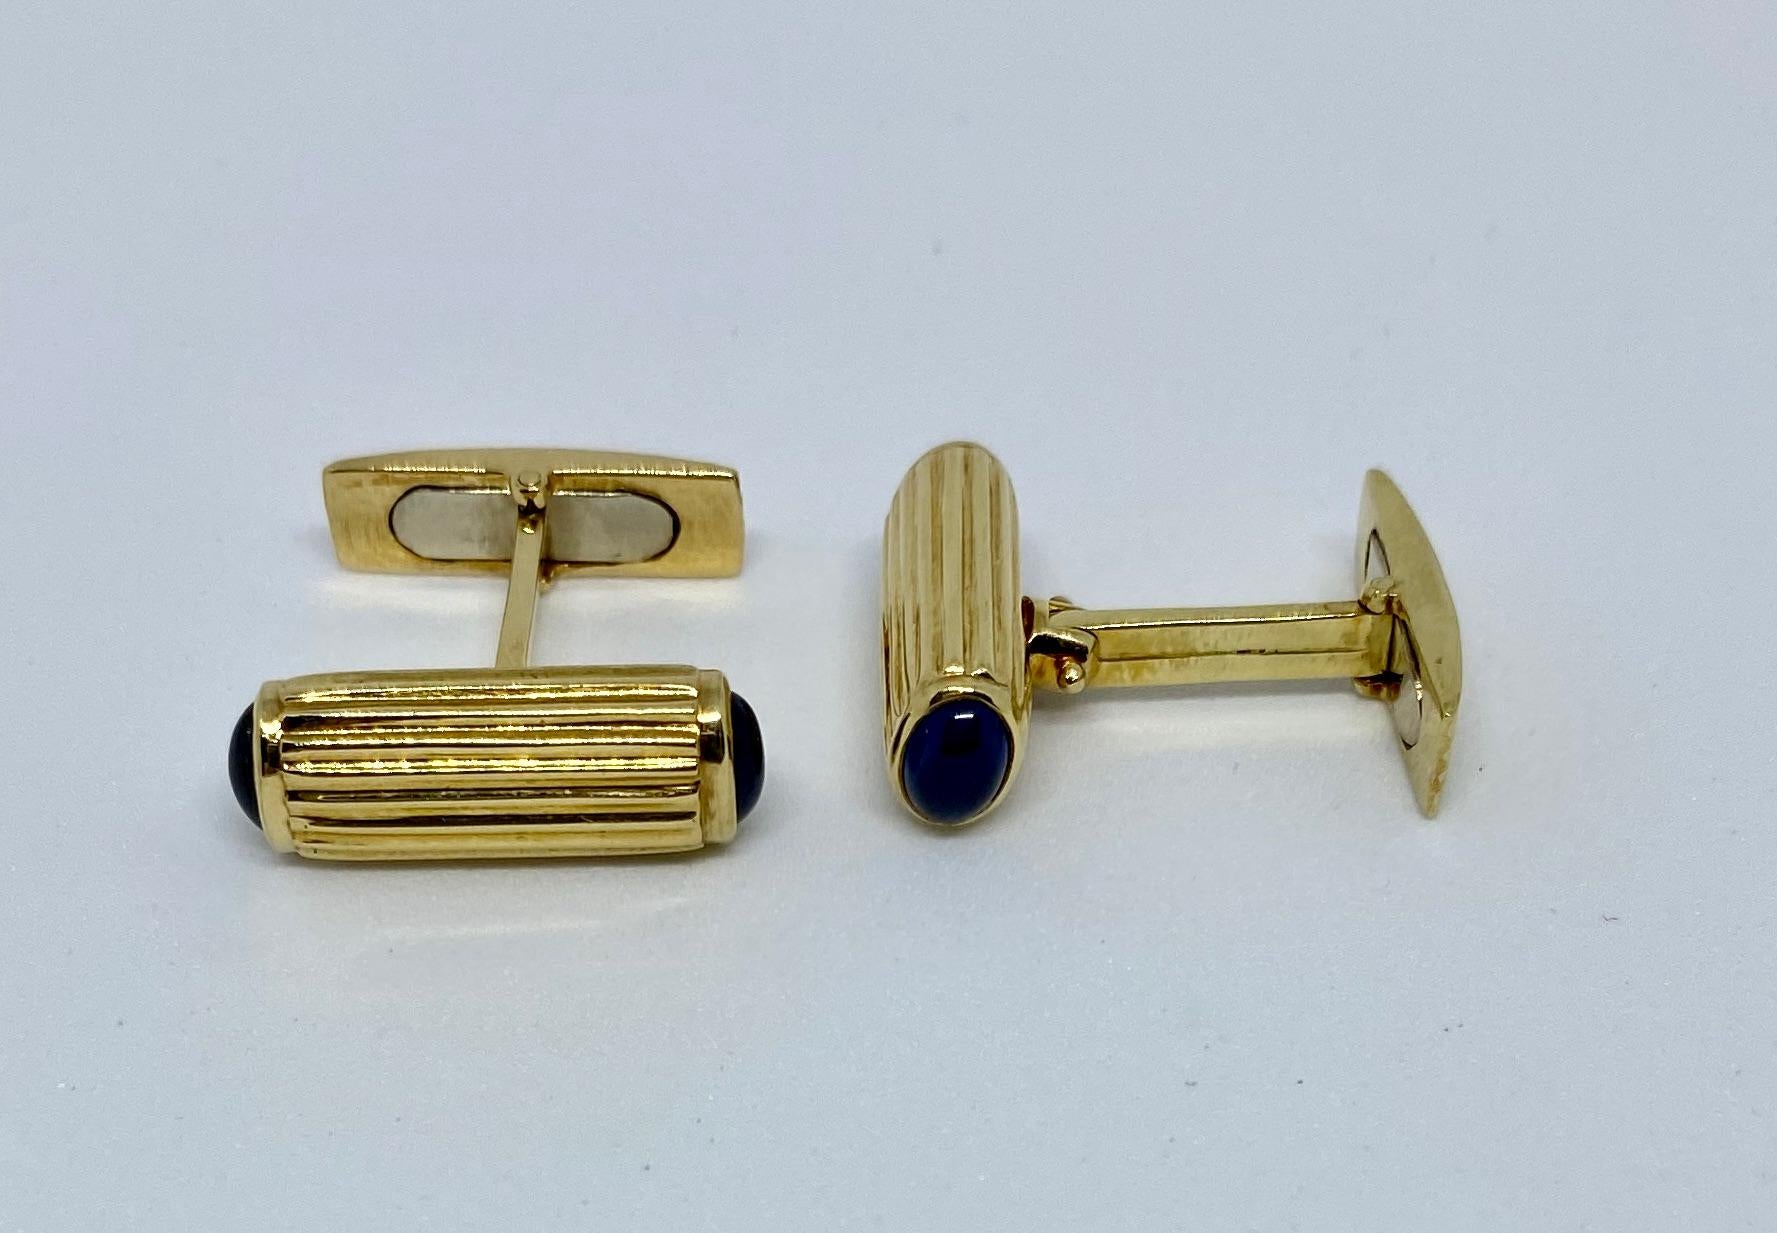 Very stylish, classic baton-style cufflinks featuring four cabochon-cut oval blue sapphires set in ribbed 18K gold.

The batons measure 20.6mm long and 7.6mm high. Each of the four oval sapphires measures 5.8mm by 4.3mm. The batons are connected to